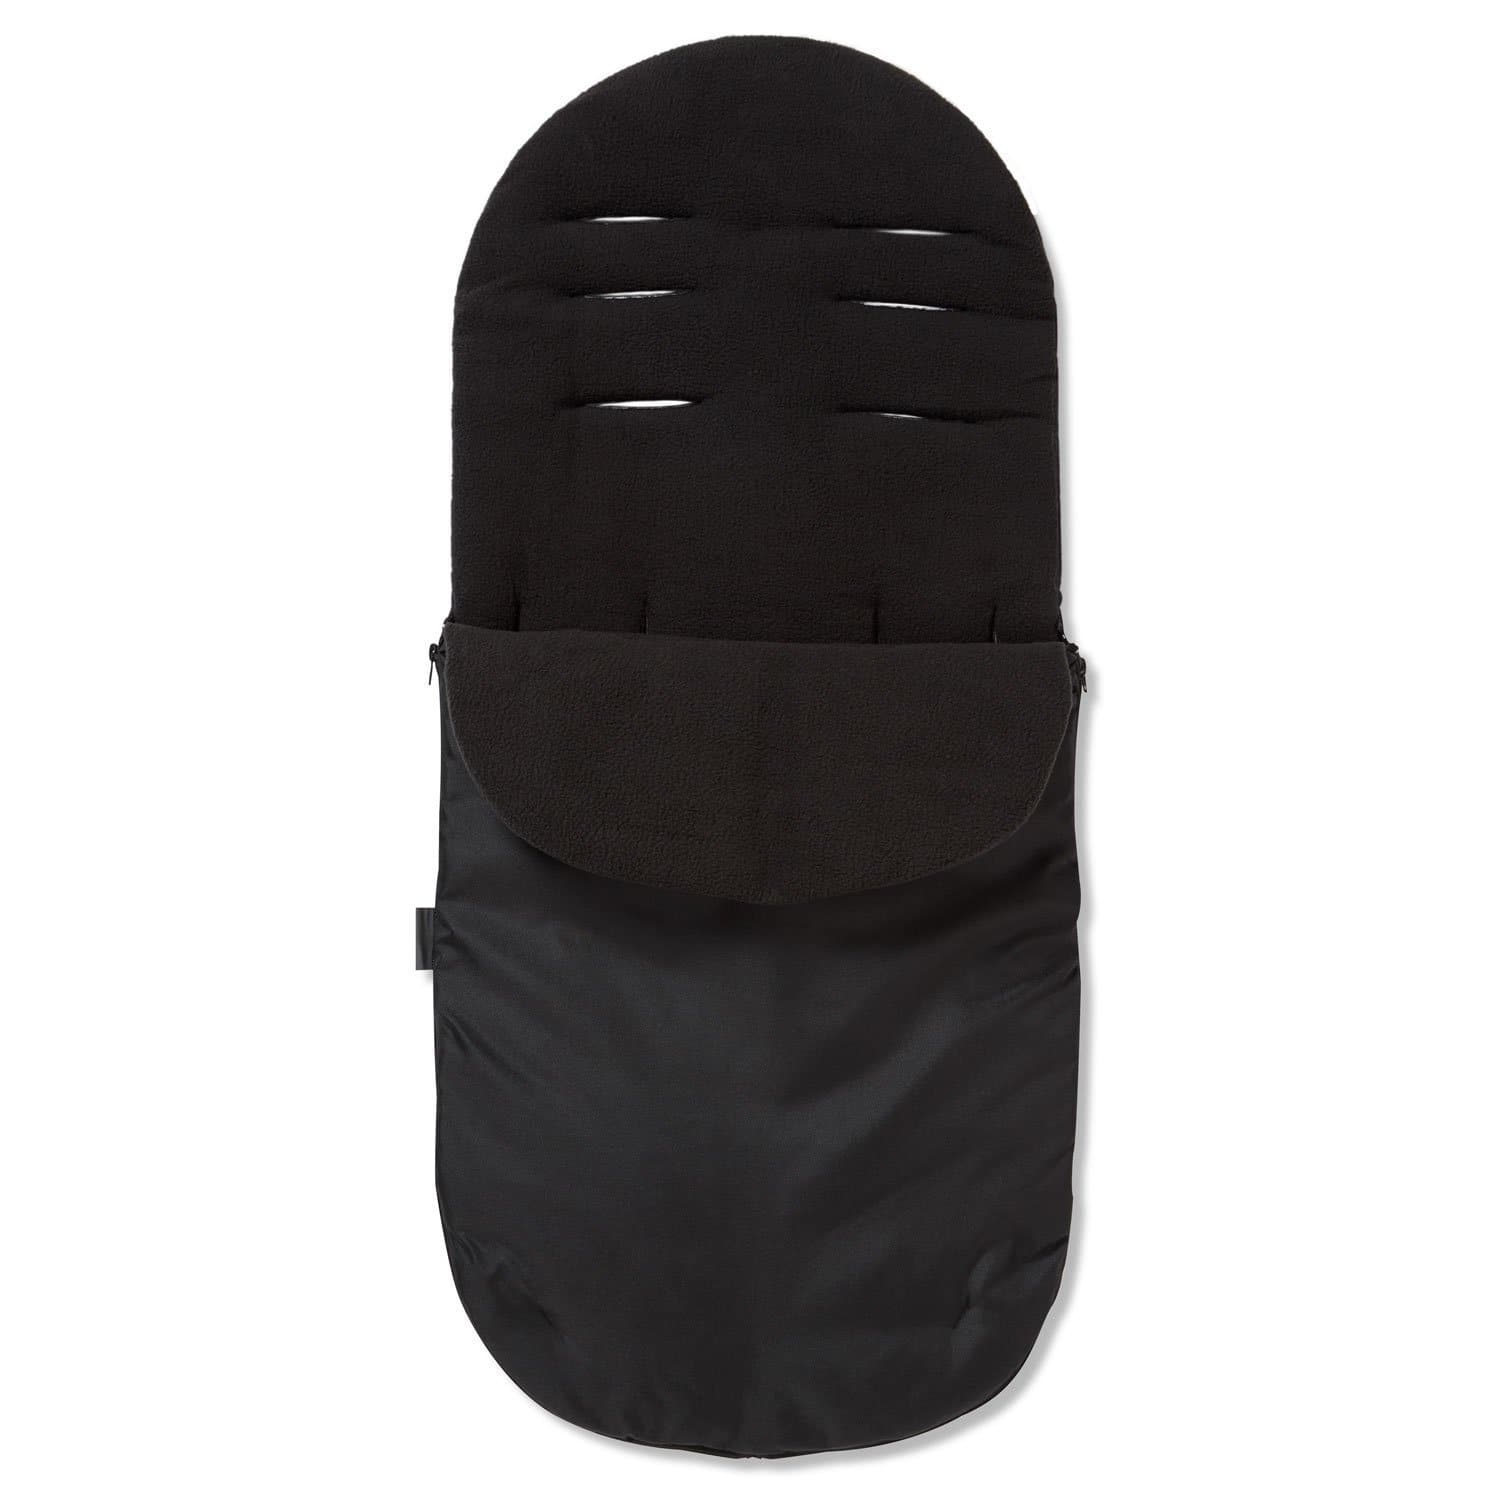 Footmuff / Cosy Toes Compatible with Baby Elegance - Black / Fits All Models | For Your Little One